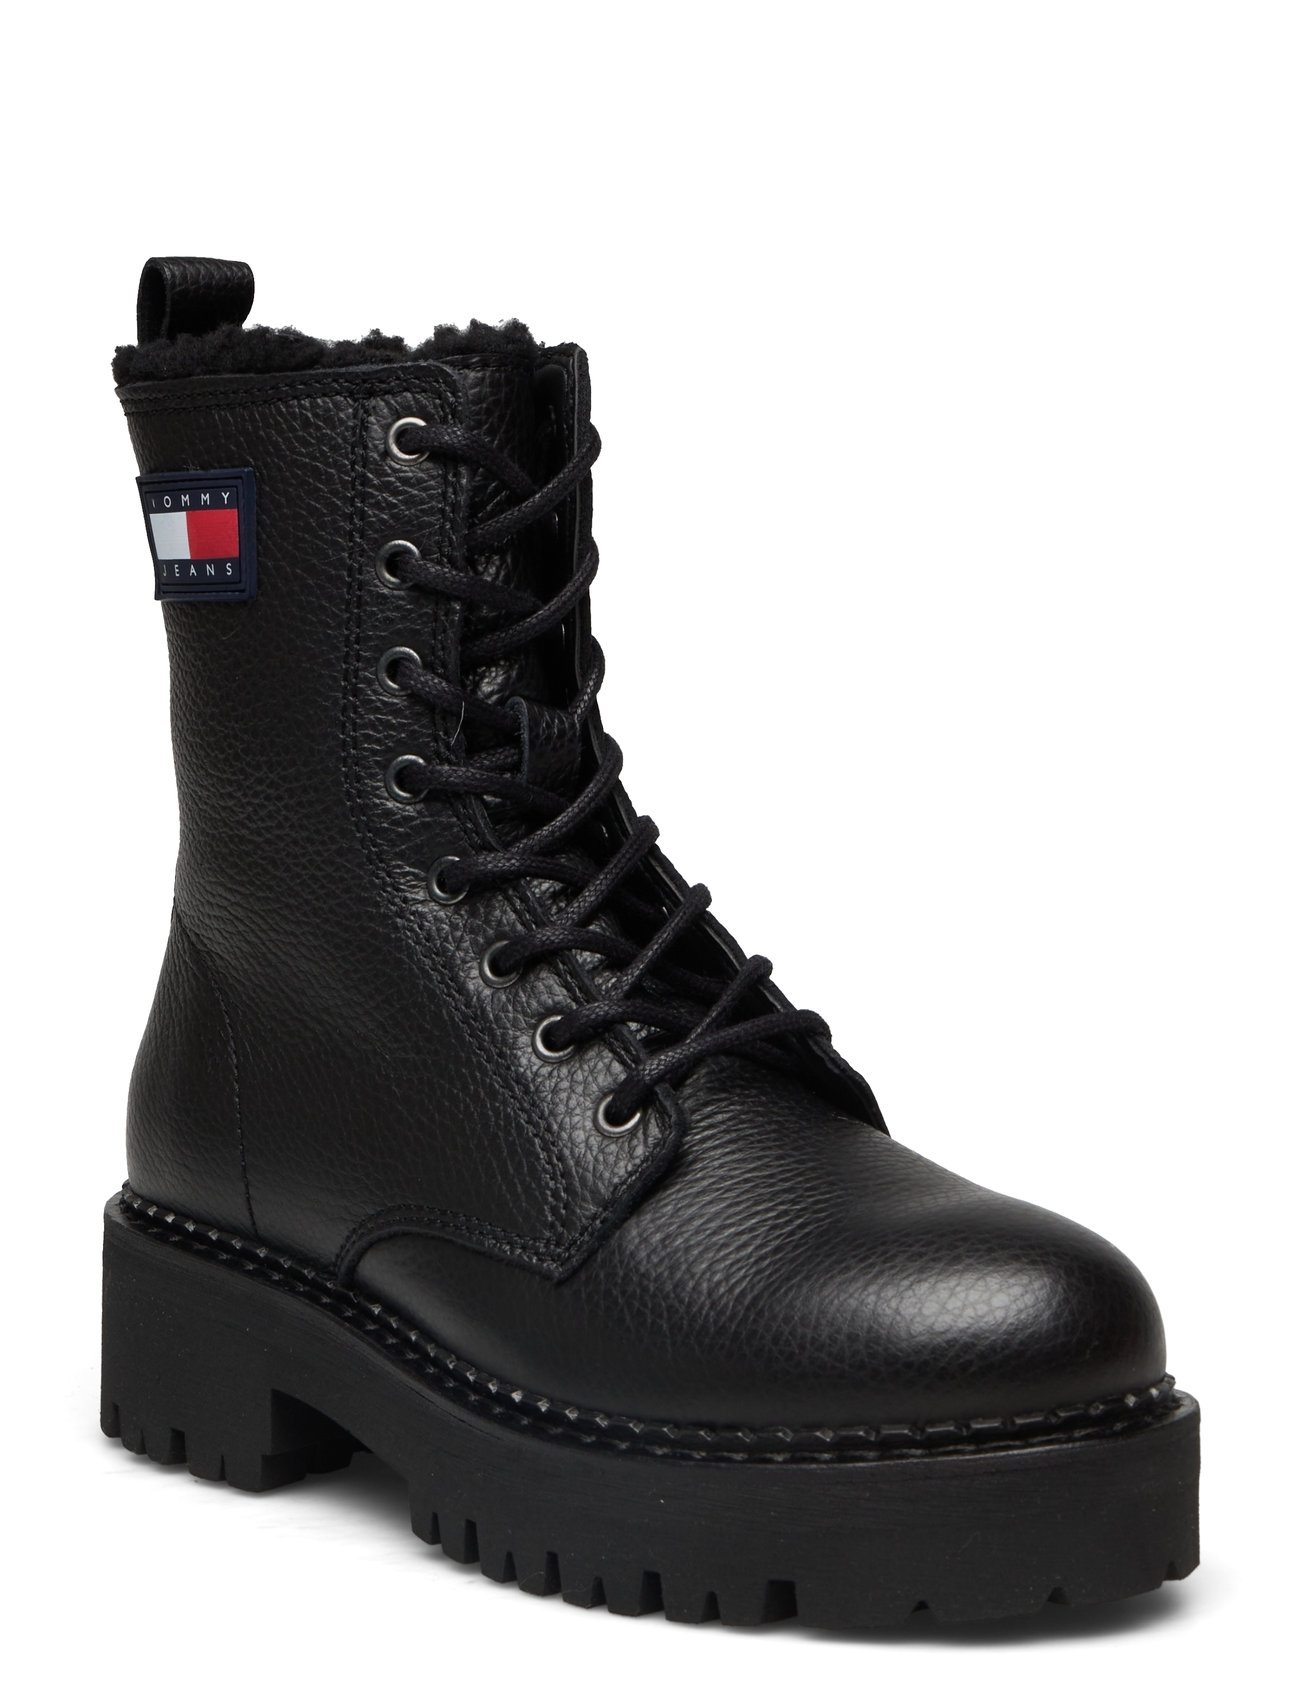 Tjw Urban Boot Tumbled Ltr Wl Shoes Boots Ankle Boots Laced Boots Black Tommy Hilfiger